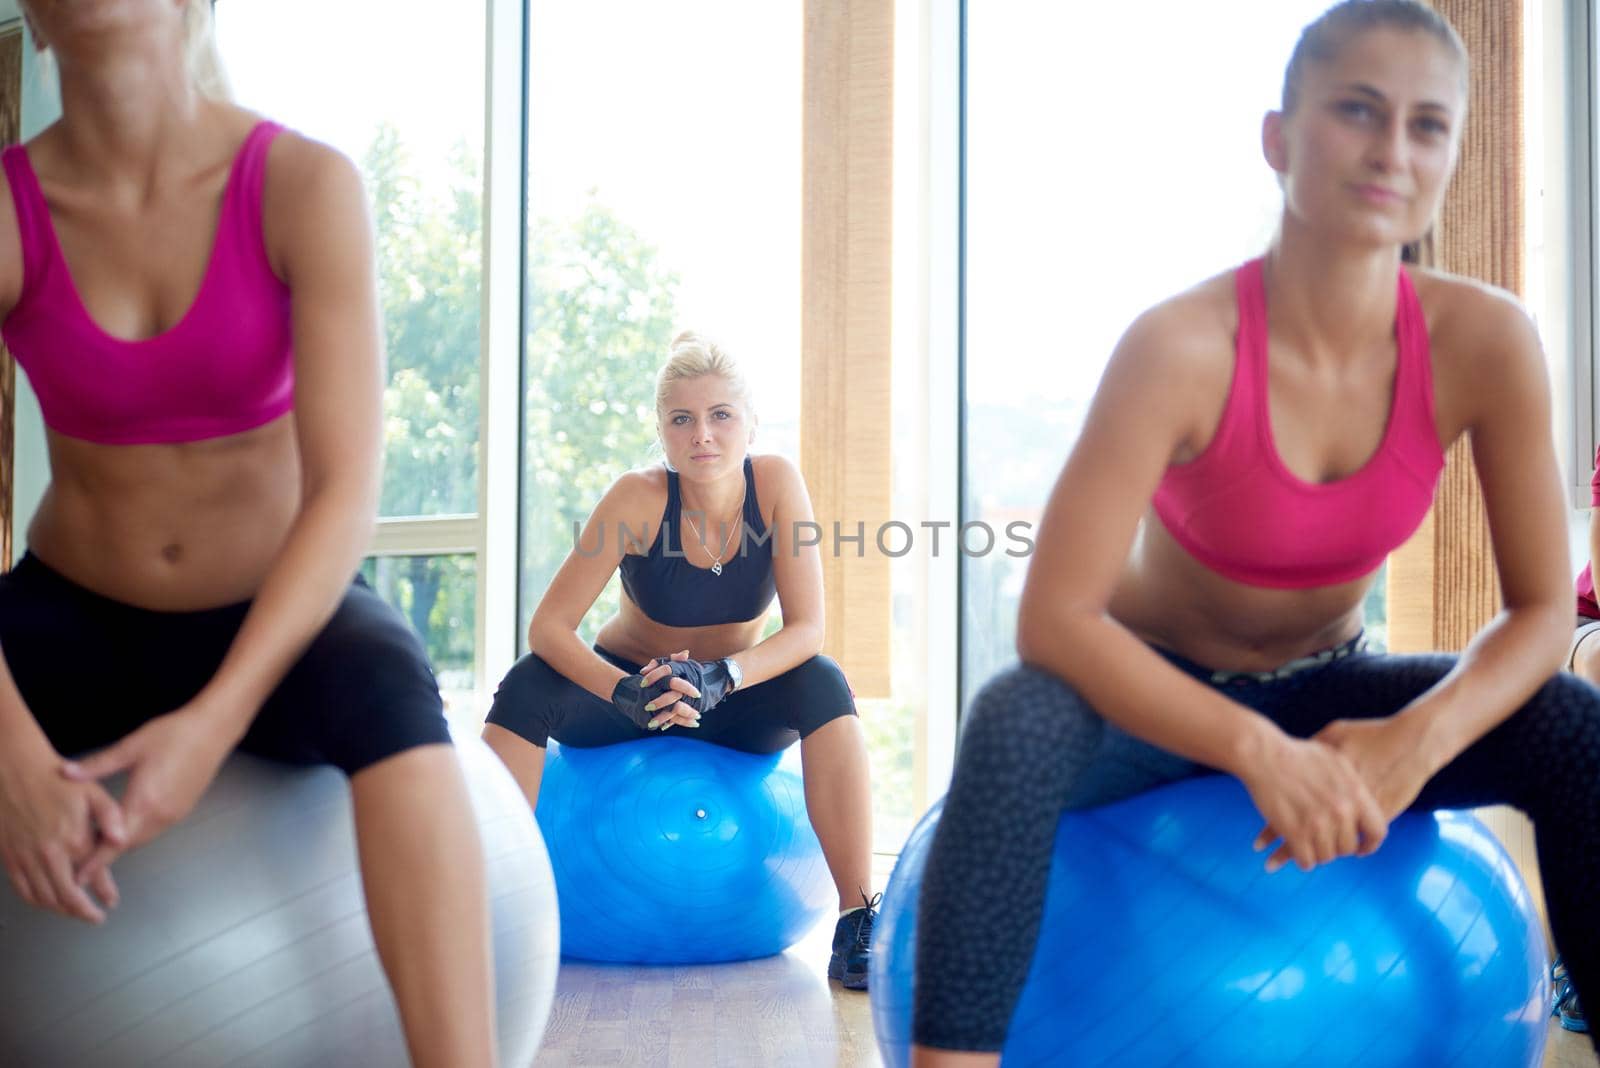 group of people exercise with balls on yoga class in fitness gym